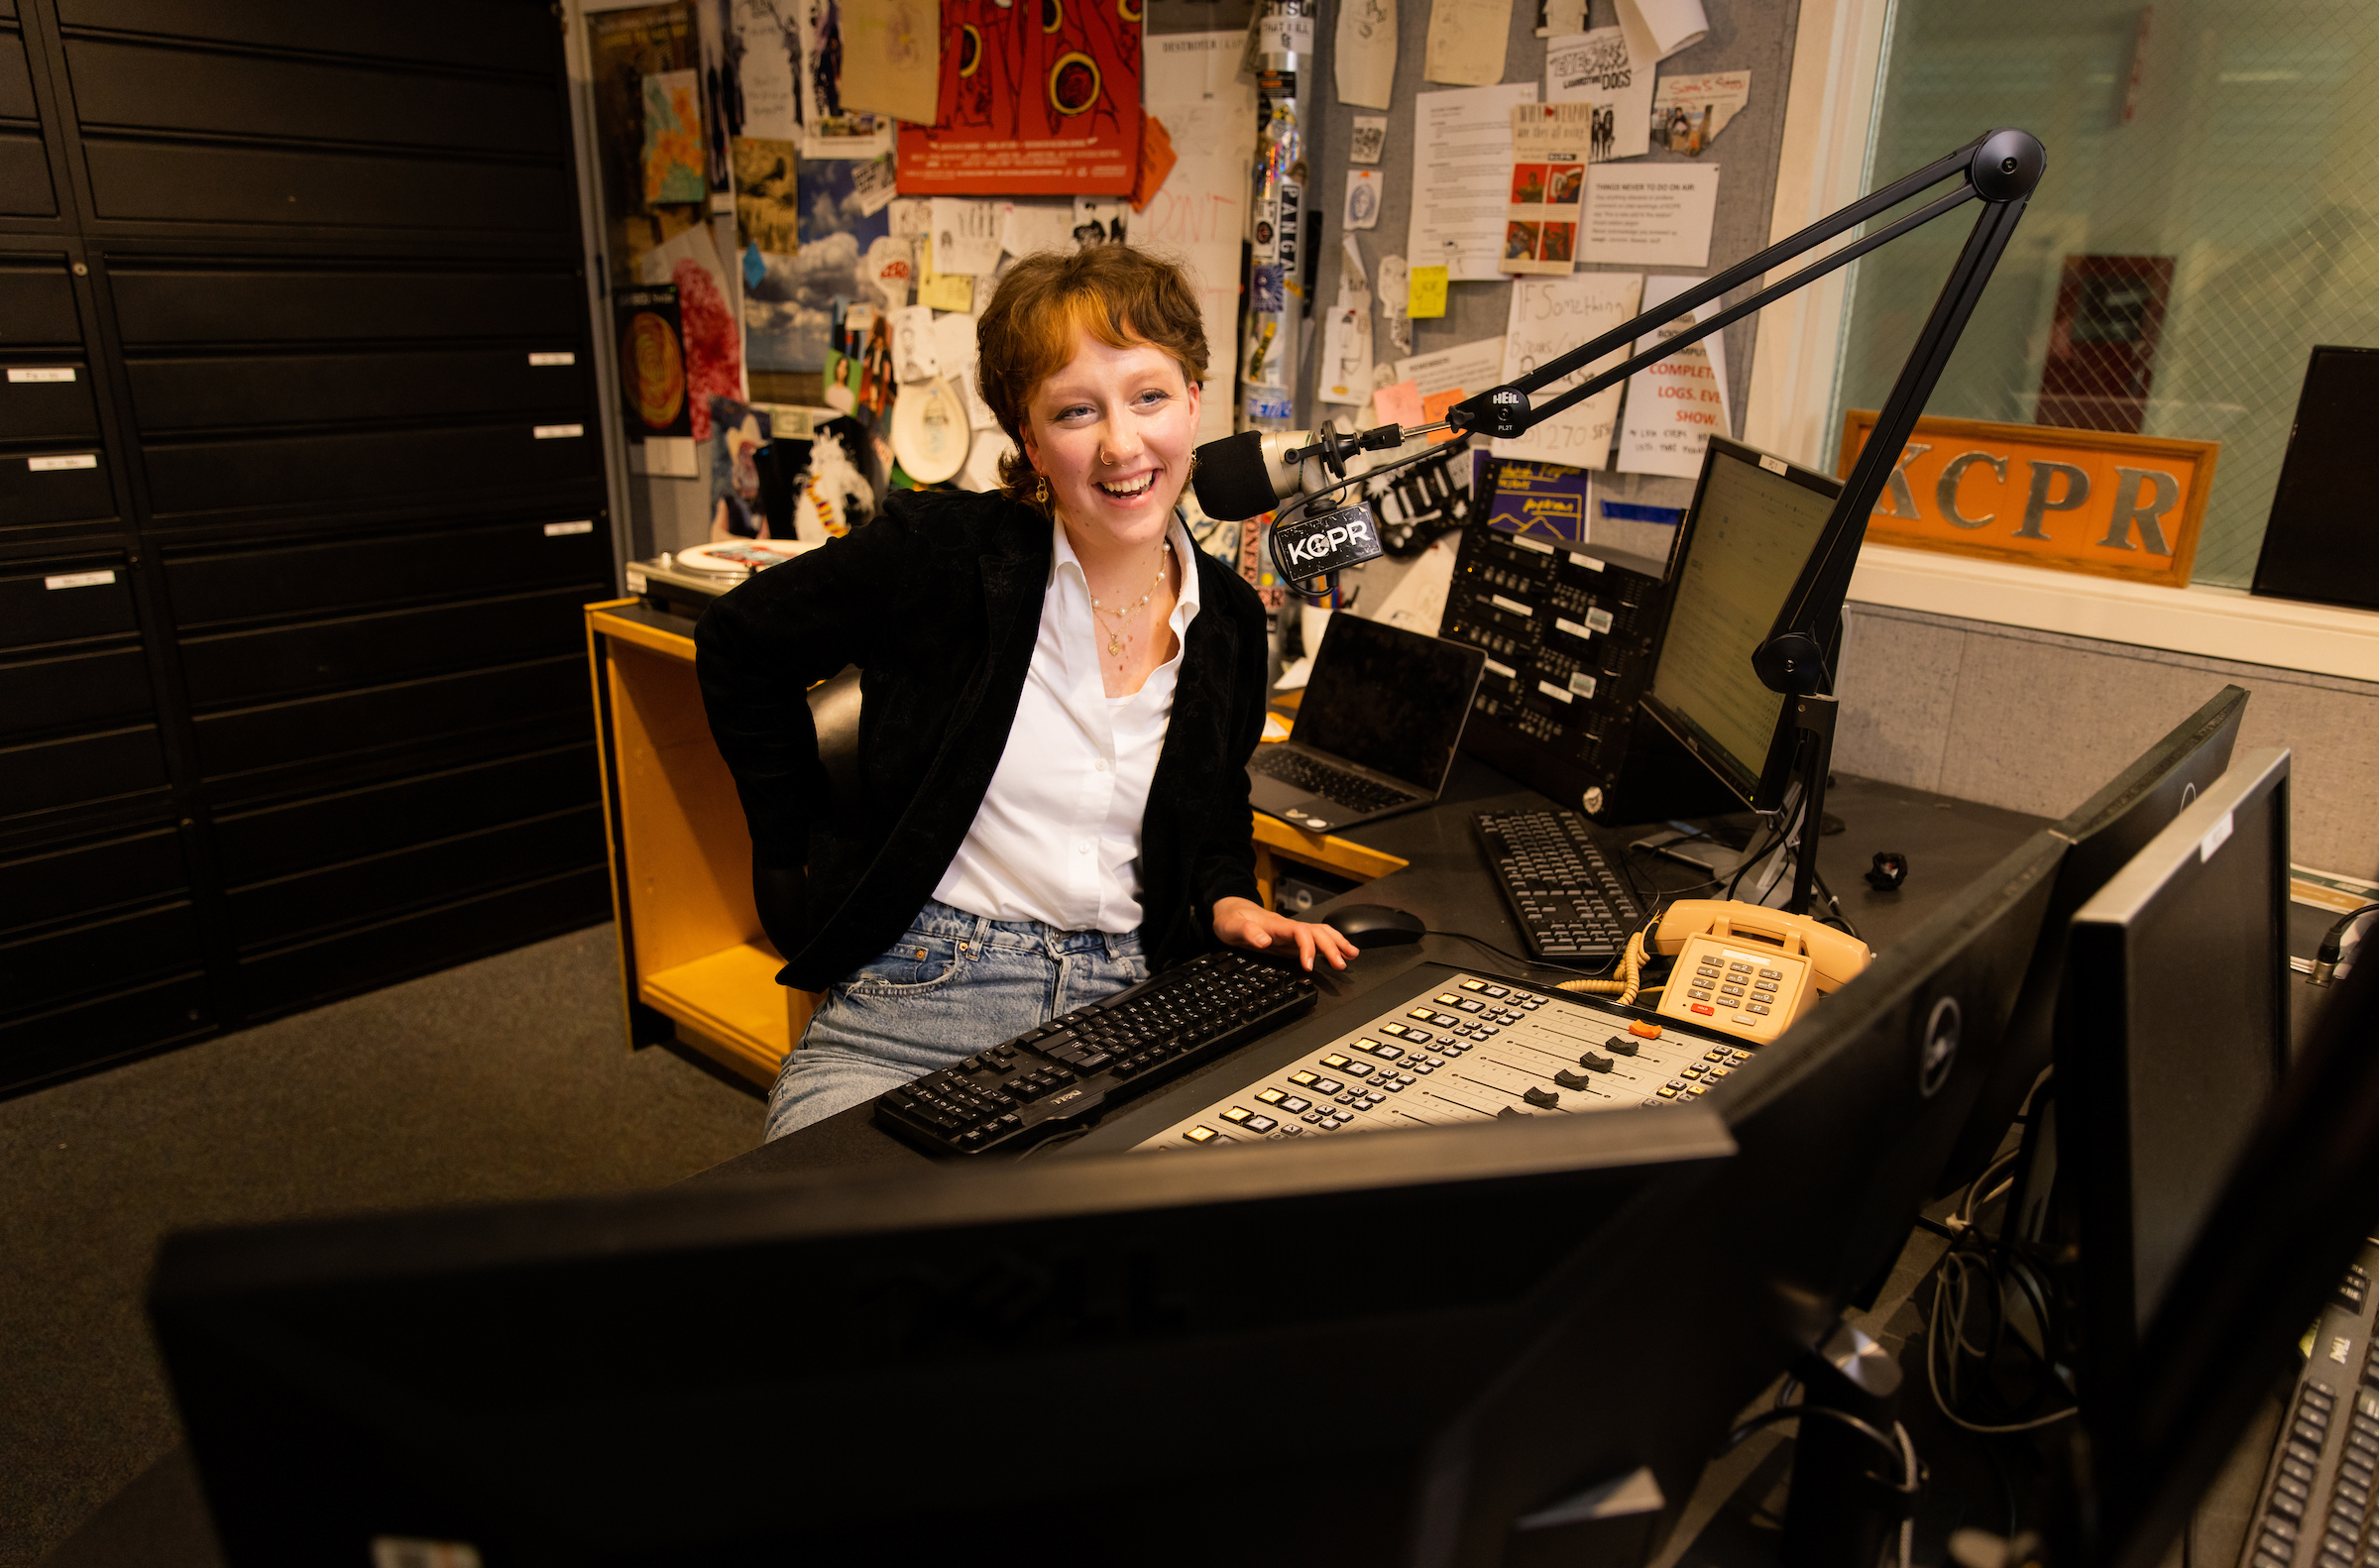 Journalism student Zoe Boyd sits behind the DJ booth at KCPR, hosting her radio show.